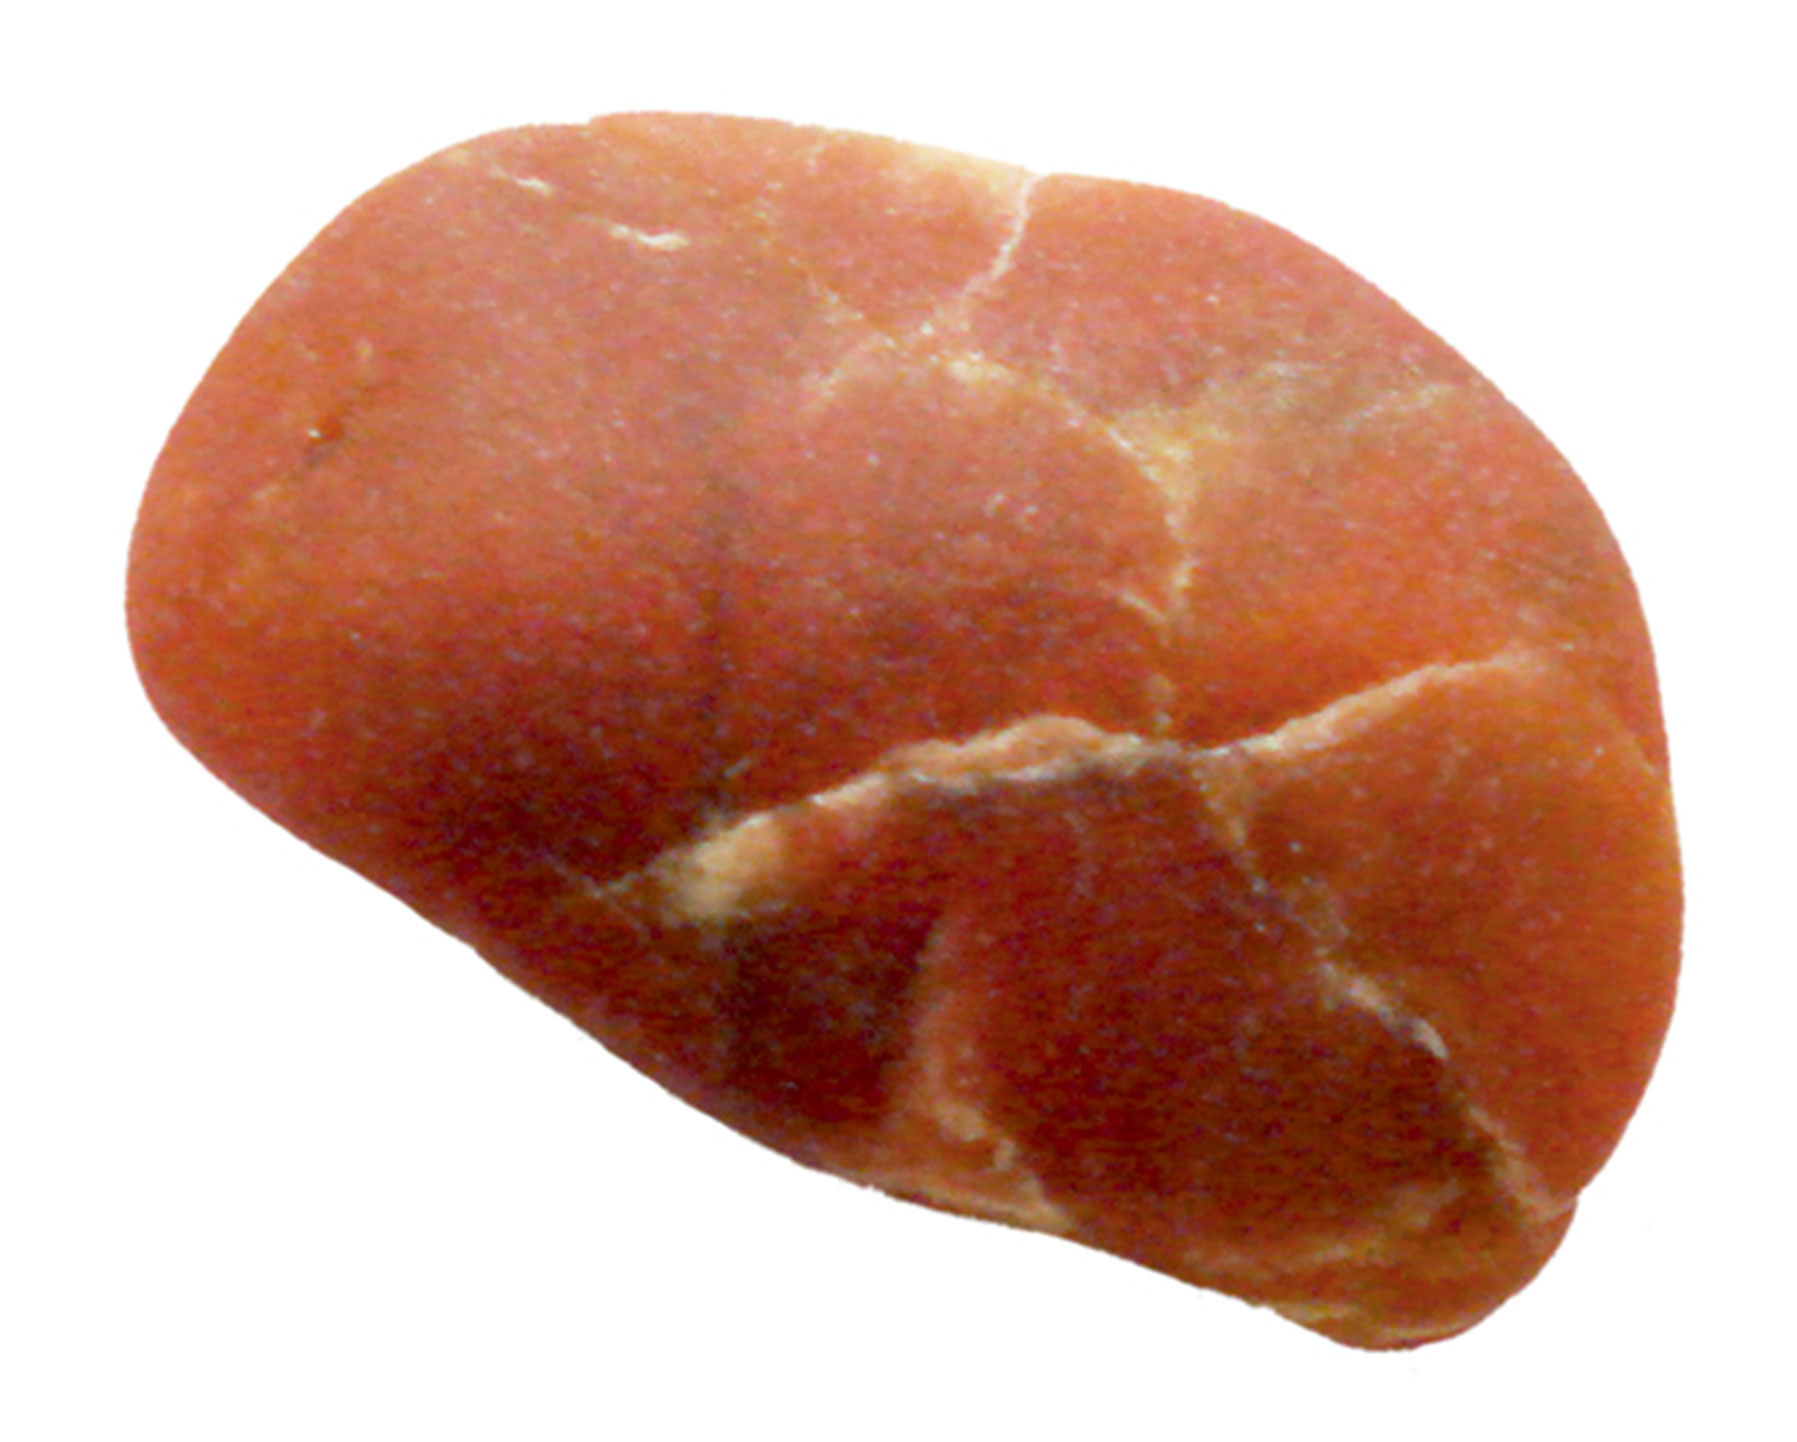 A photograph of a rock which resembles a sirloin tip roast. 